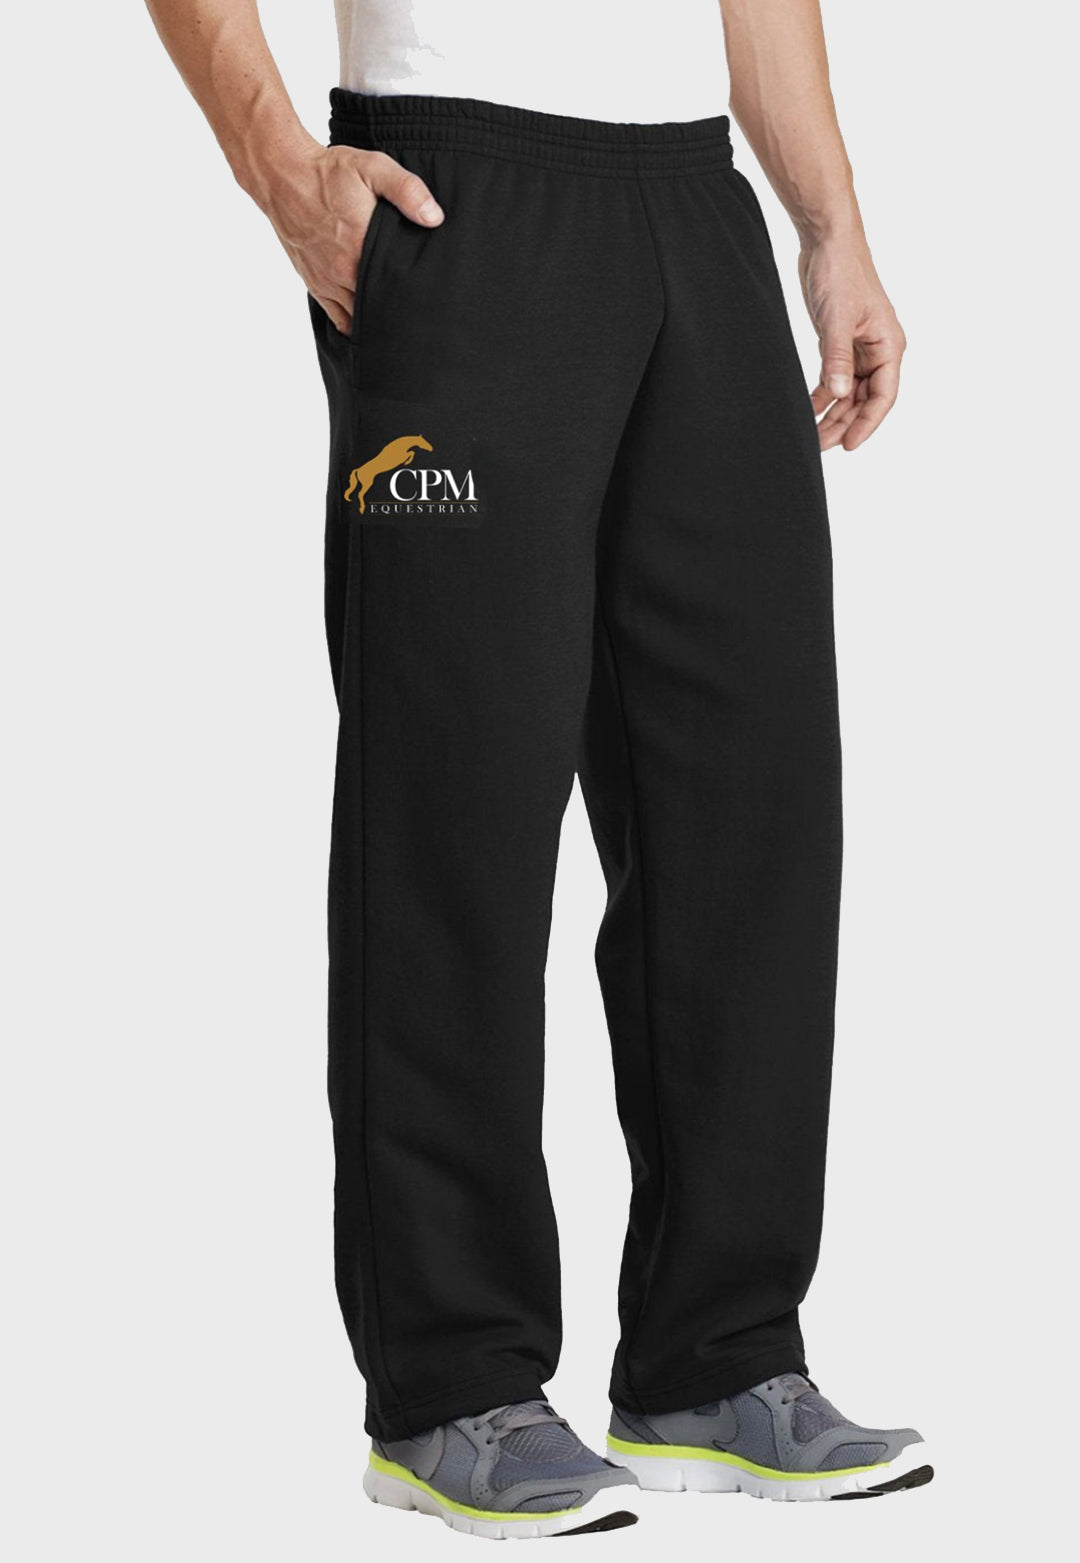 CPM Equestrian Core Fleece Sweatpant with Pockets - Adult Unisex + Youth Sizes